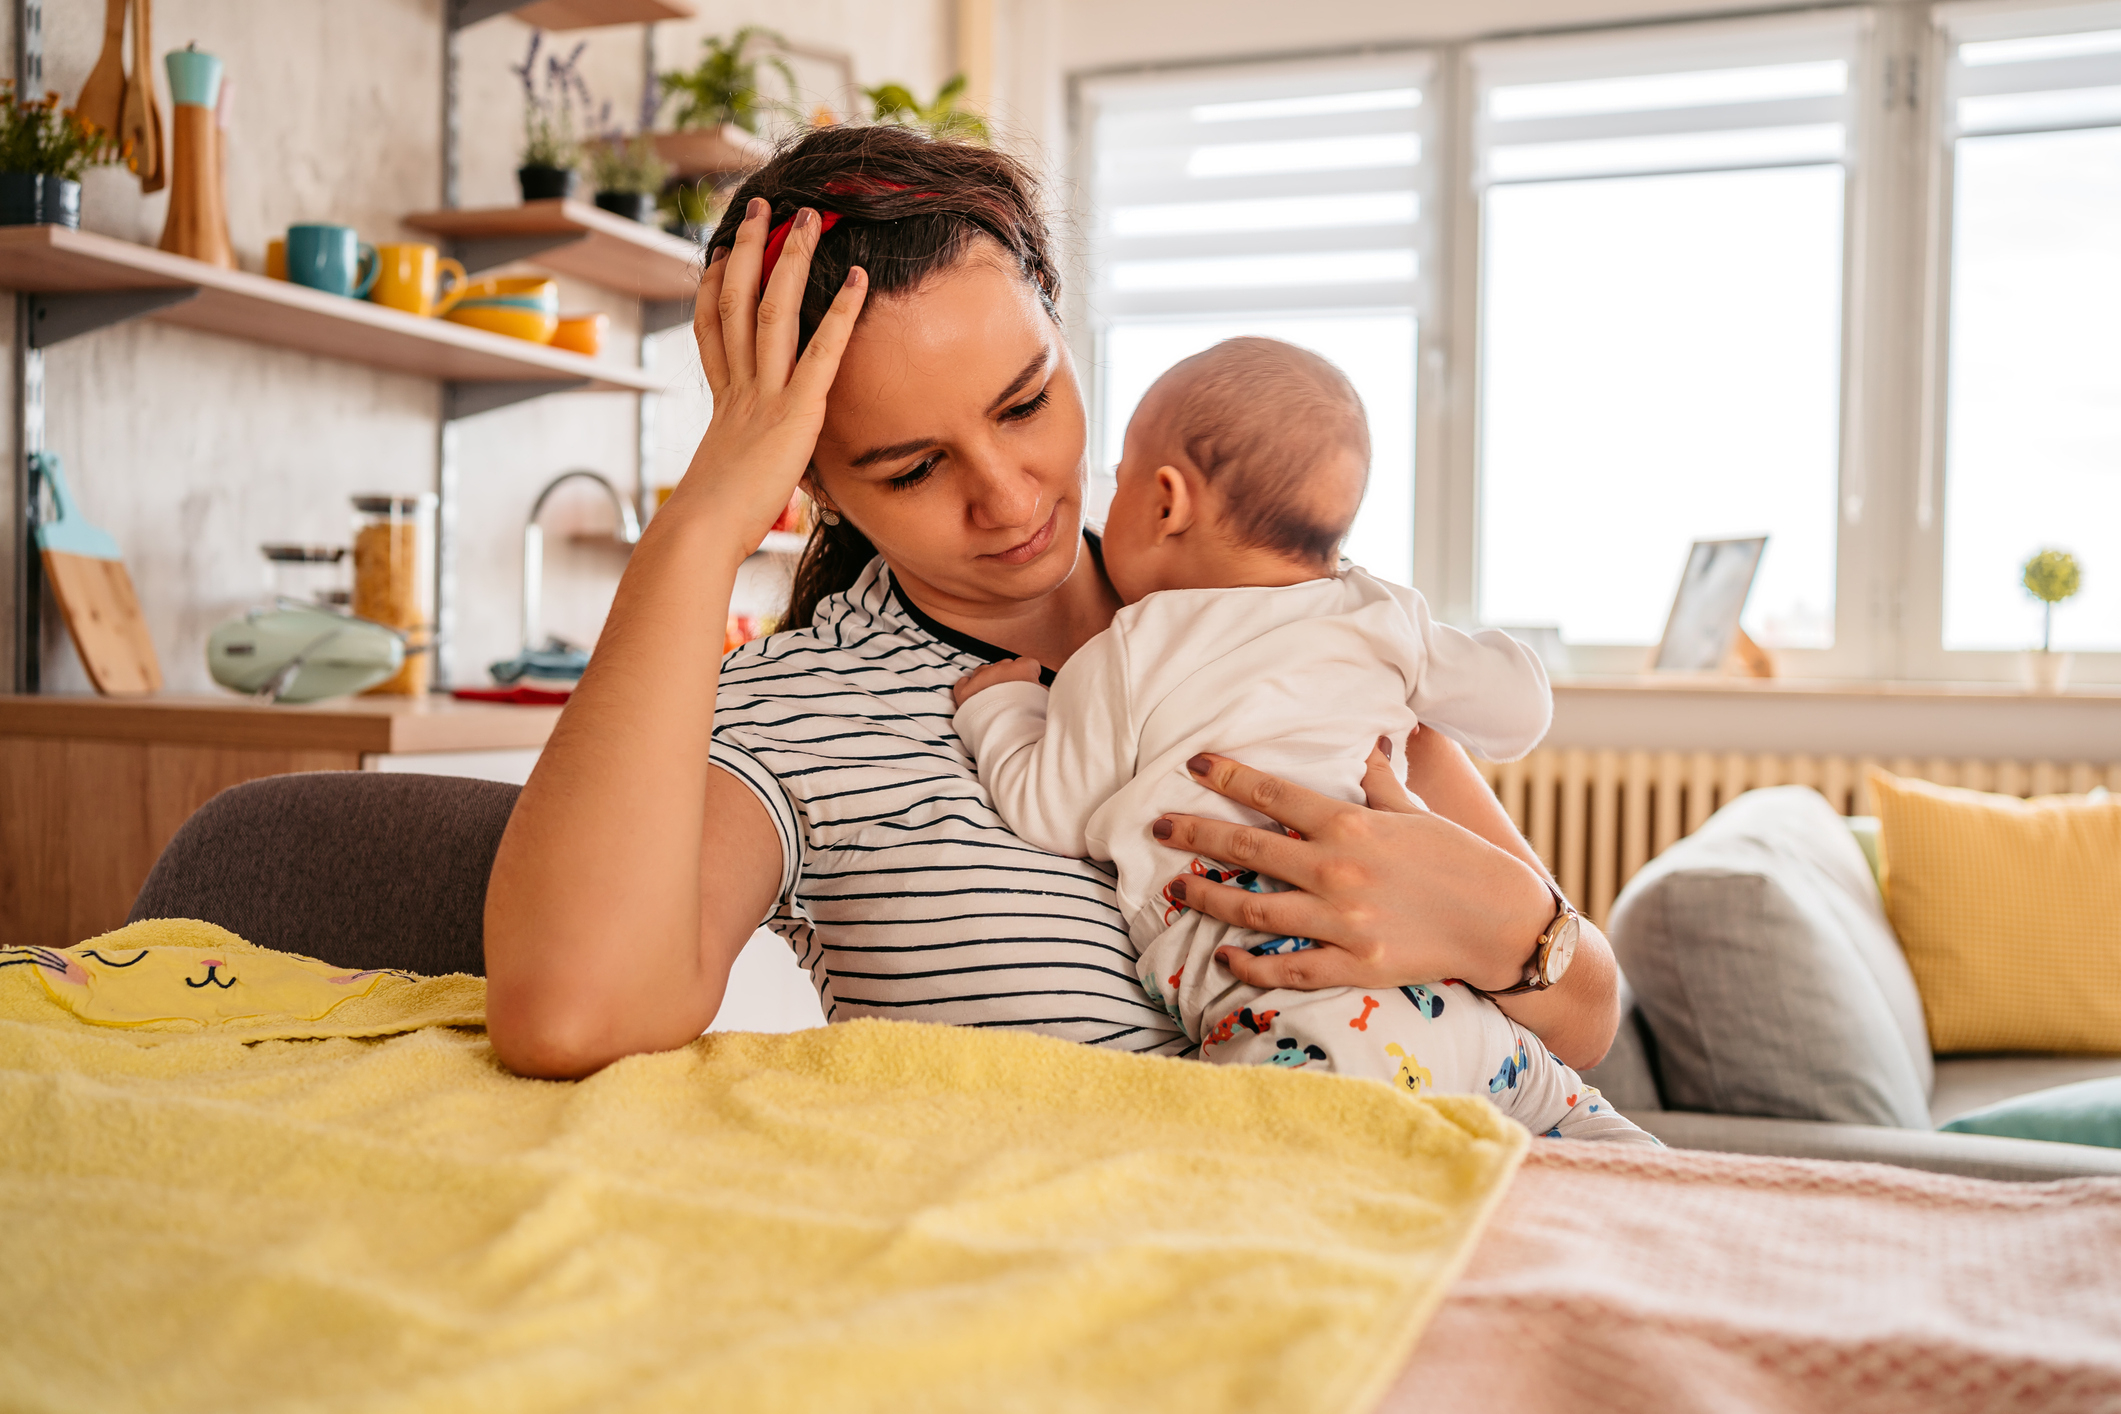 Woman holding and looking at baby with care, in a home setting